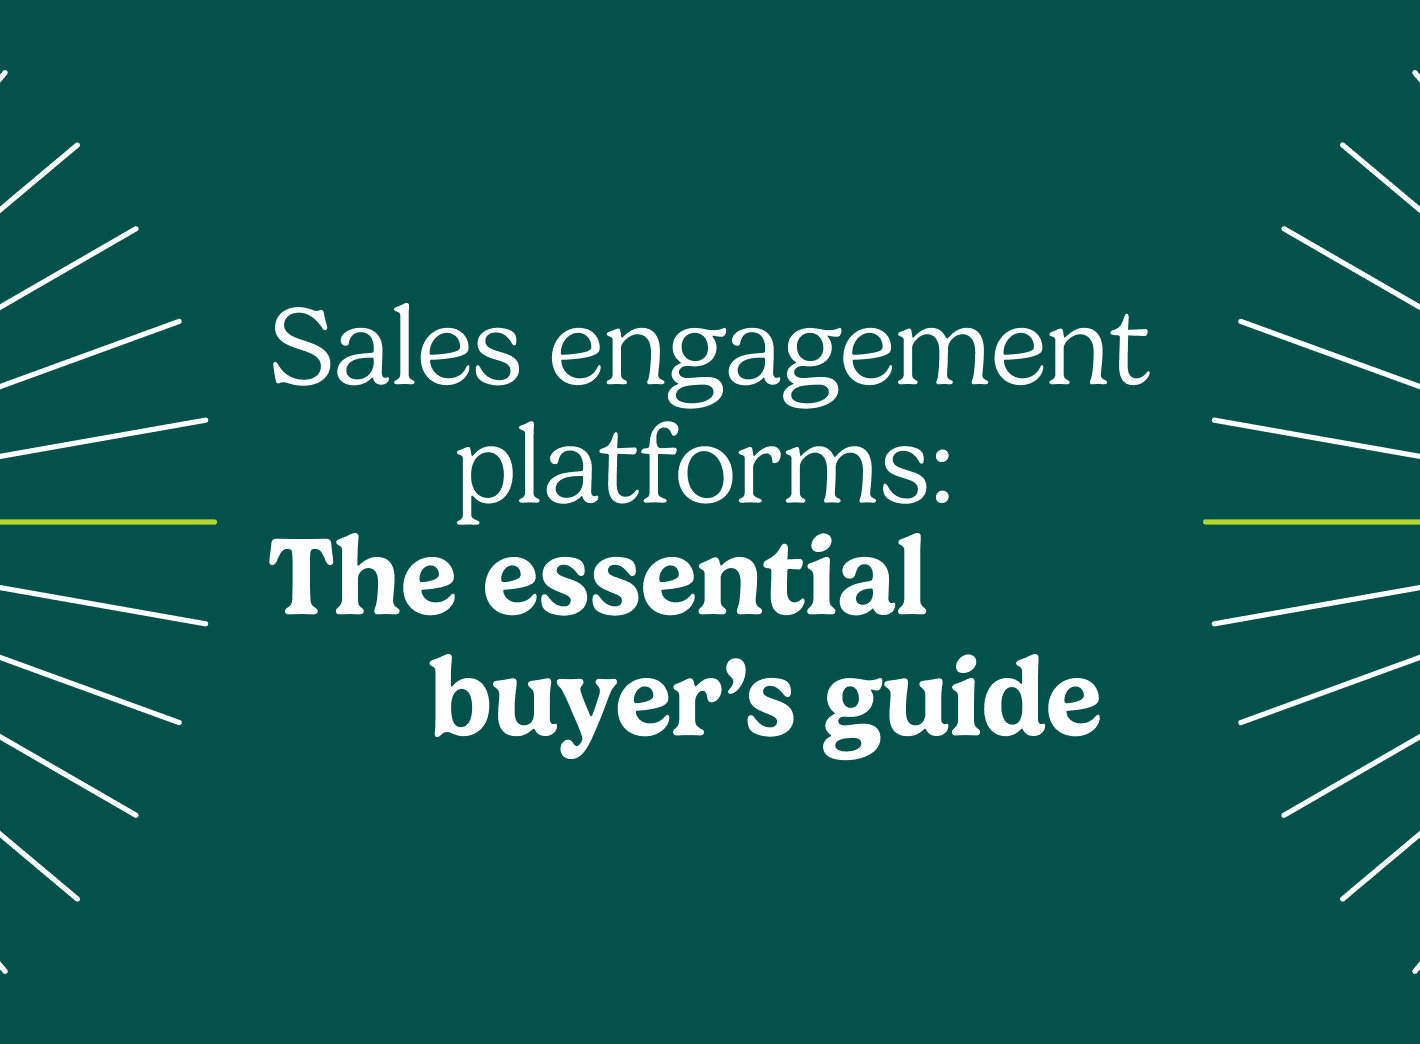 "Sales engagement platforms: The essential buyer's guide"